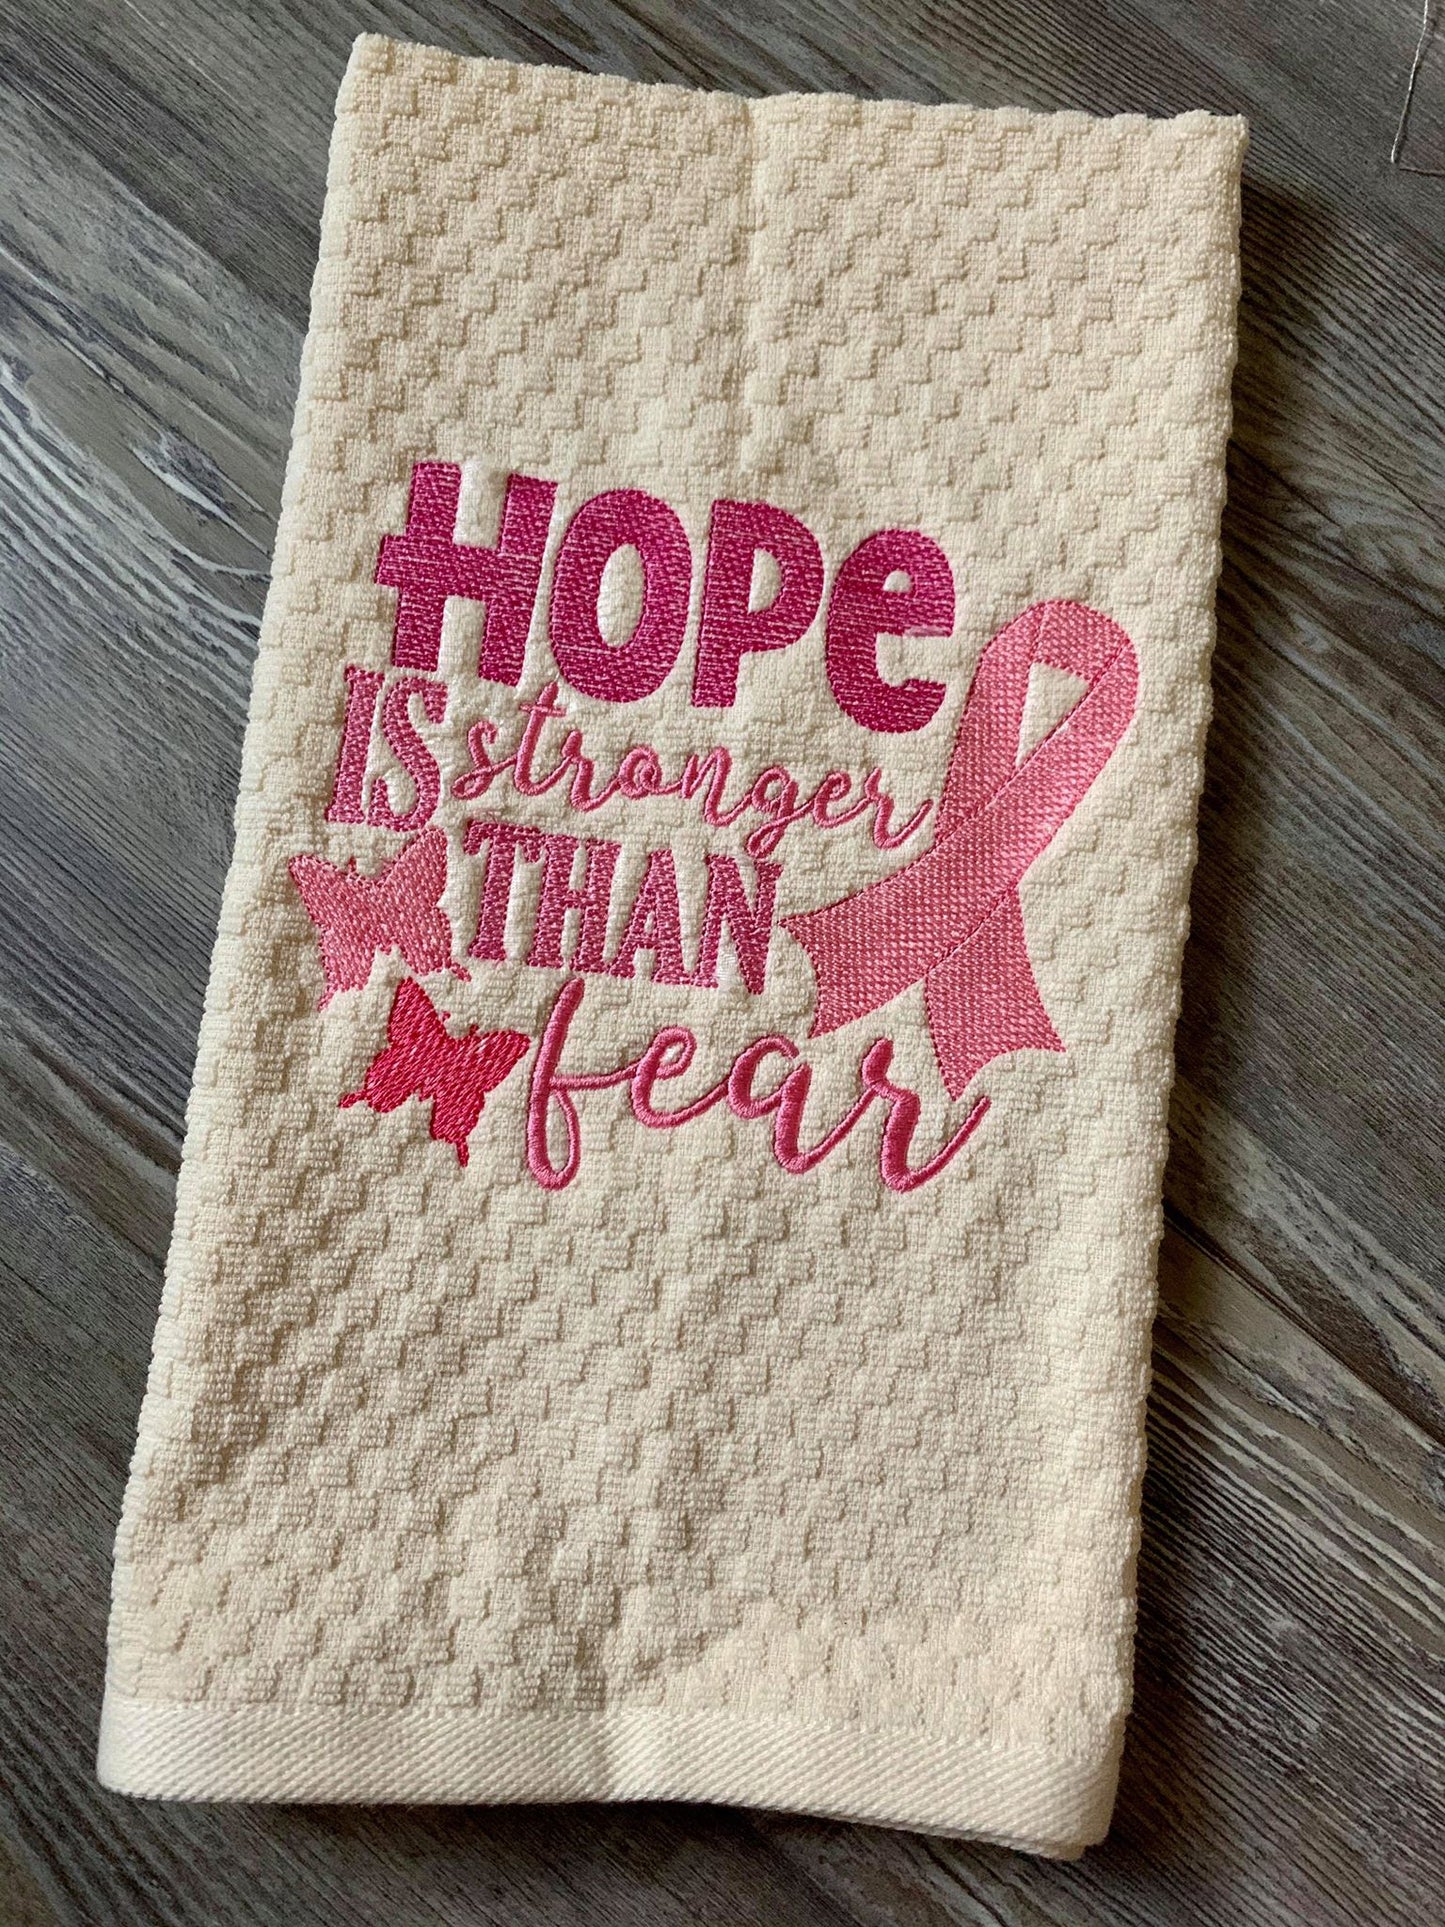 Hope Is Stronger Than Fear - 3 Sizes - Digital Embroidery Design